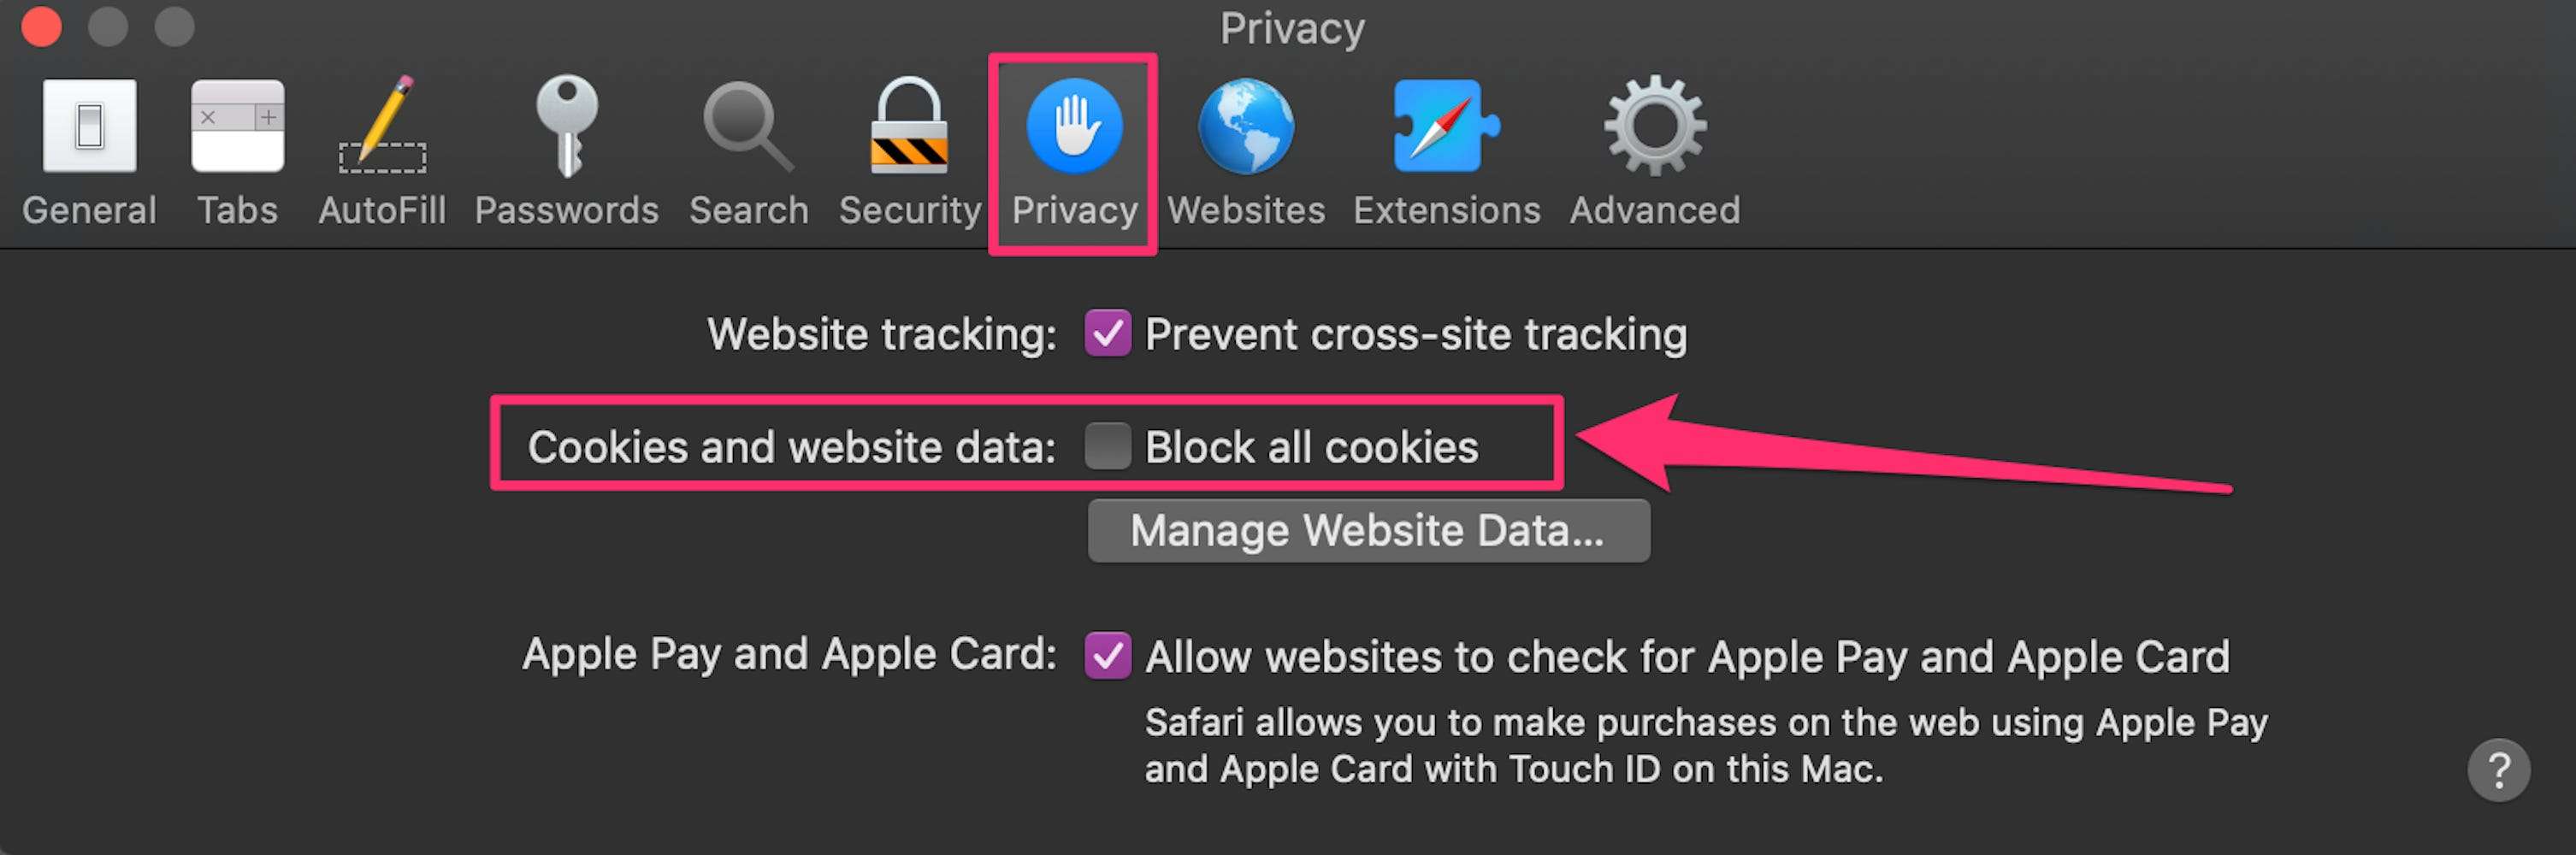 how to enable cookies on mac for specific website chrome